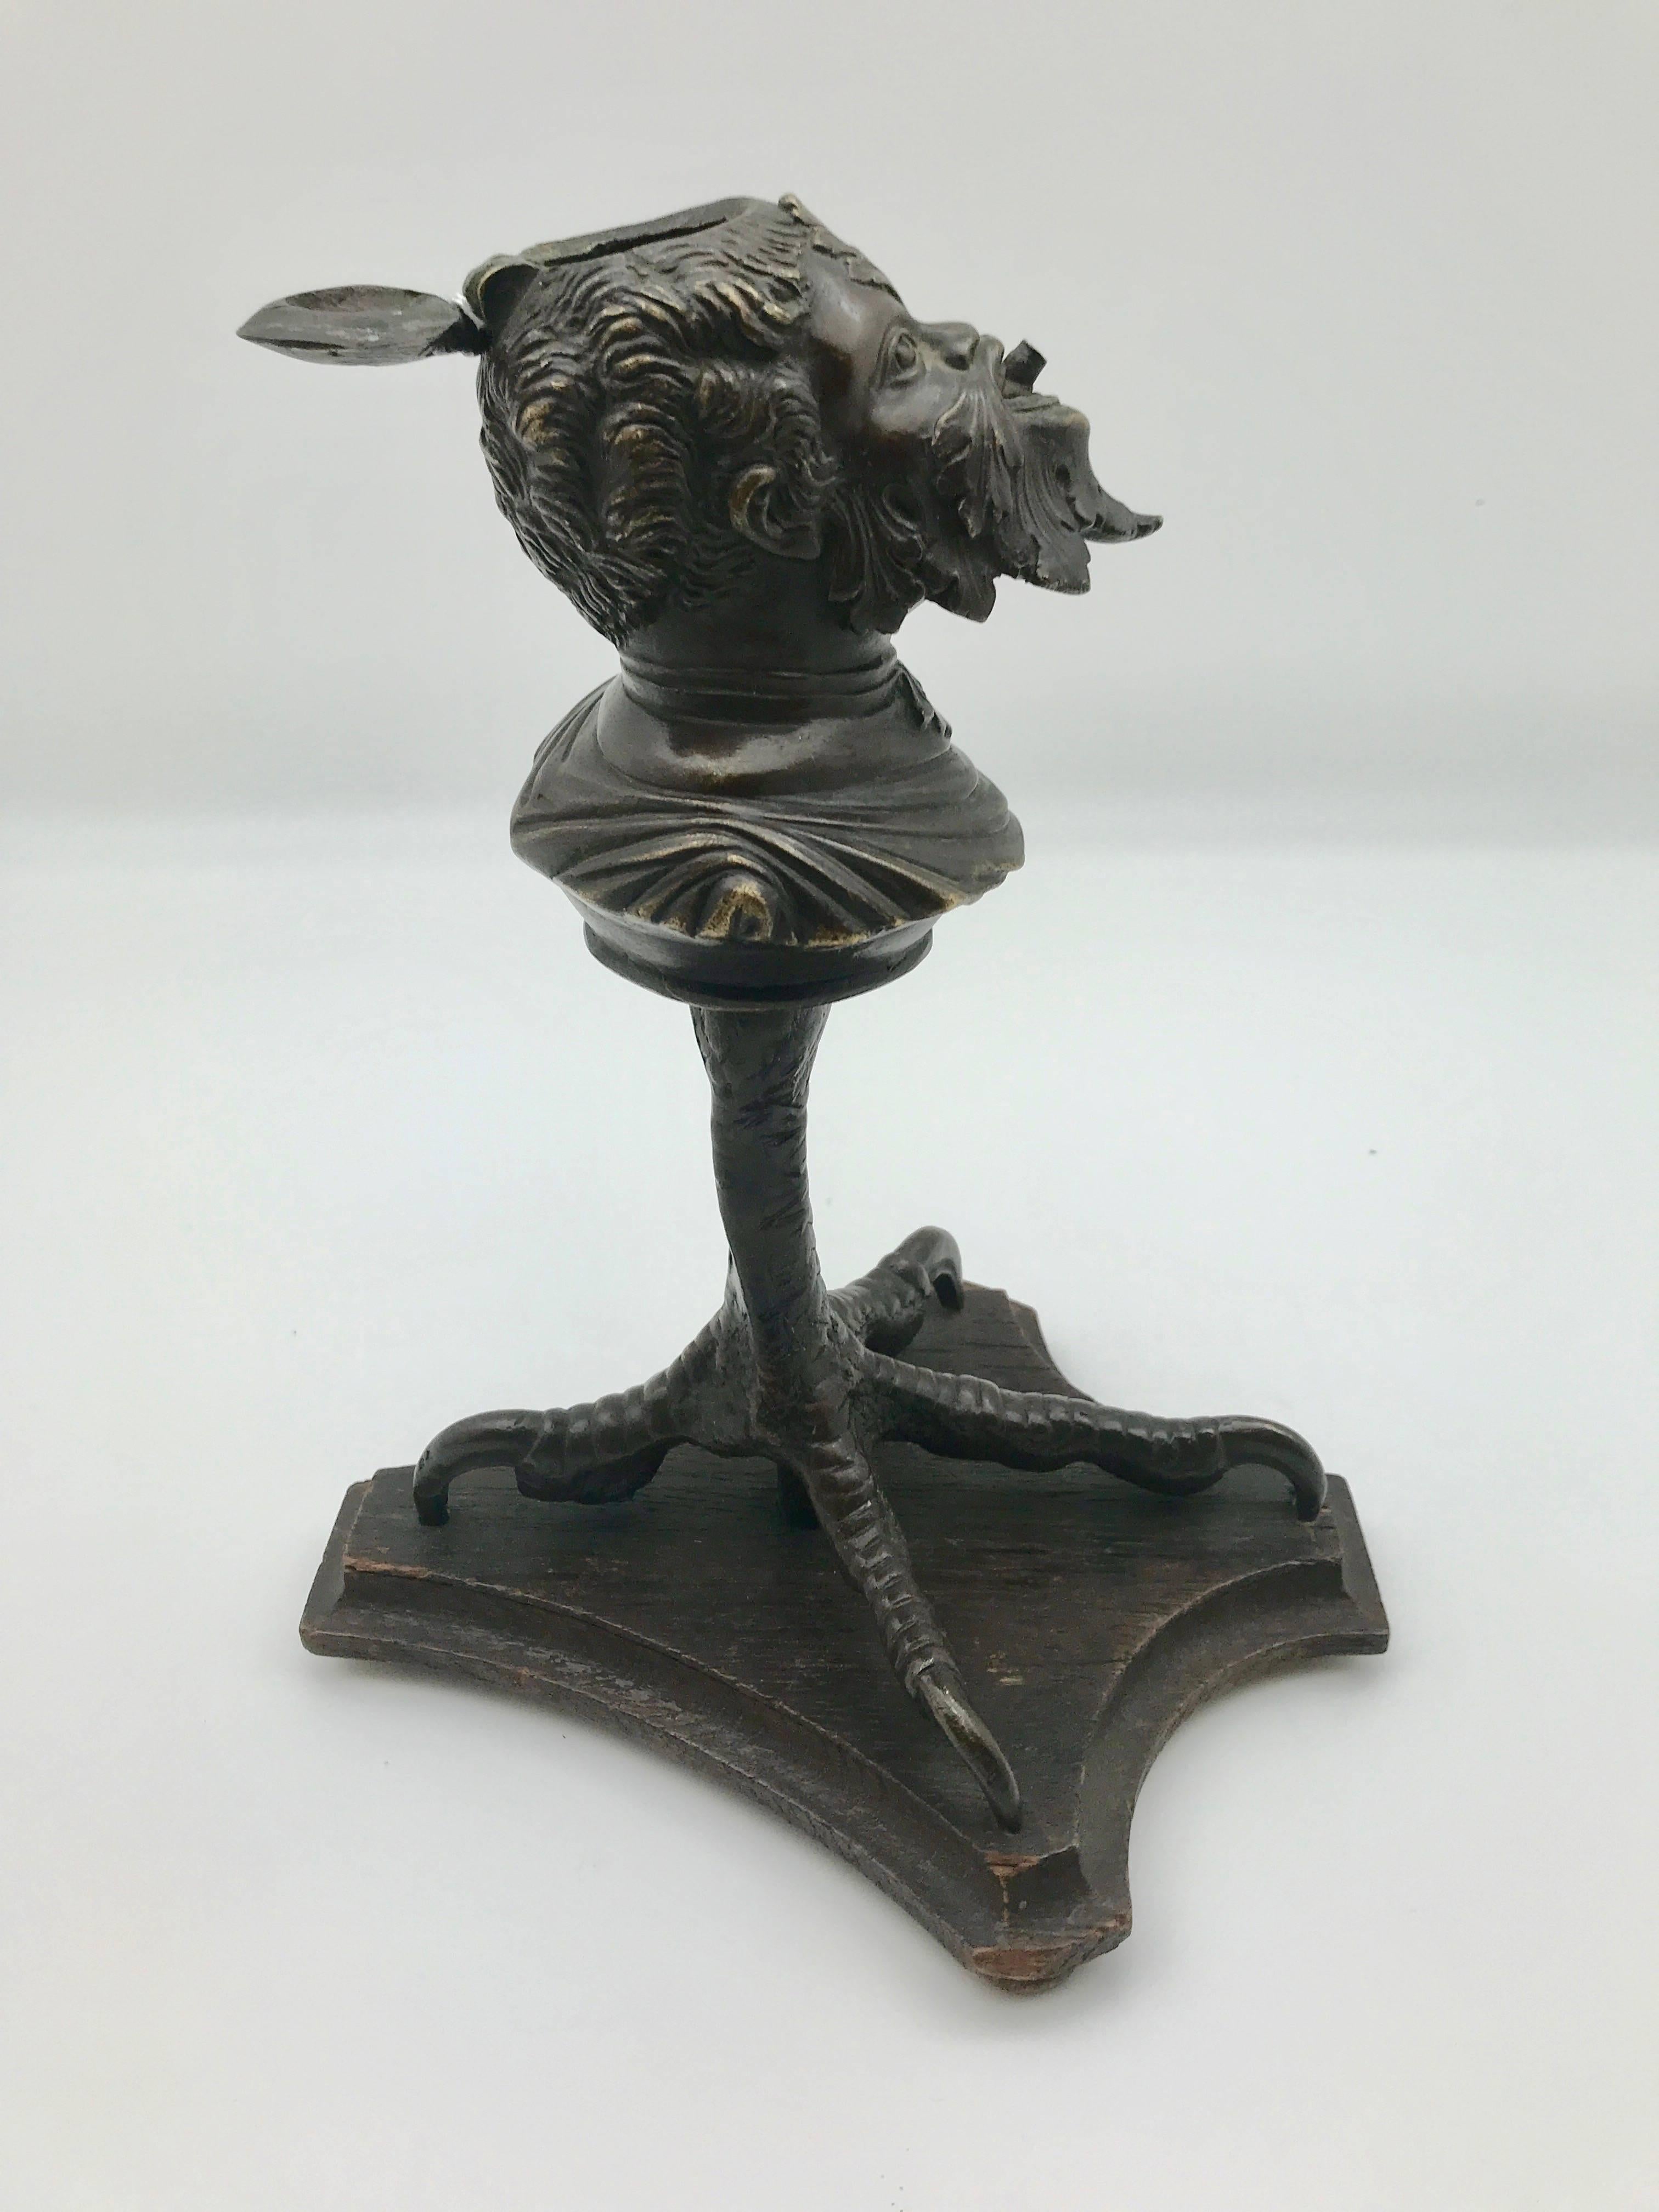 Unique 19th century Continental bronze tobacco cigar lighter. The cast head, smoking a cigar, is mounted on a bird's claw on top of a wooden base. The reservoir, once filled with oil through a hinged lid at the top, can be used to use to light your